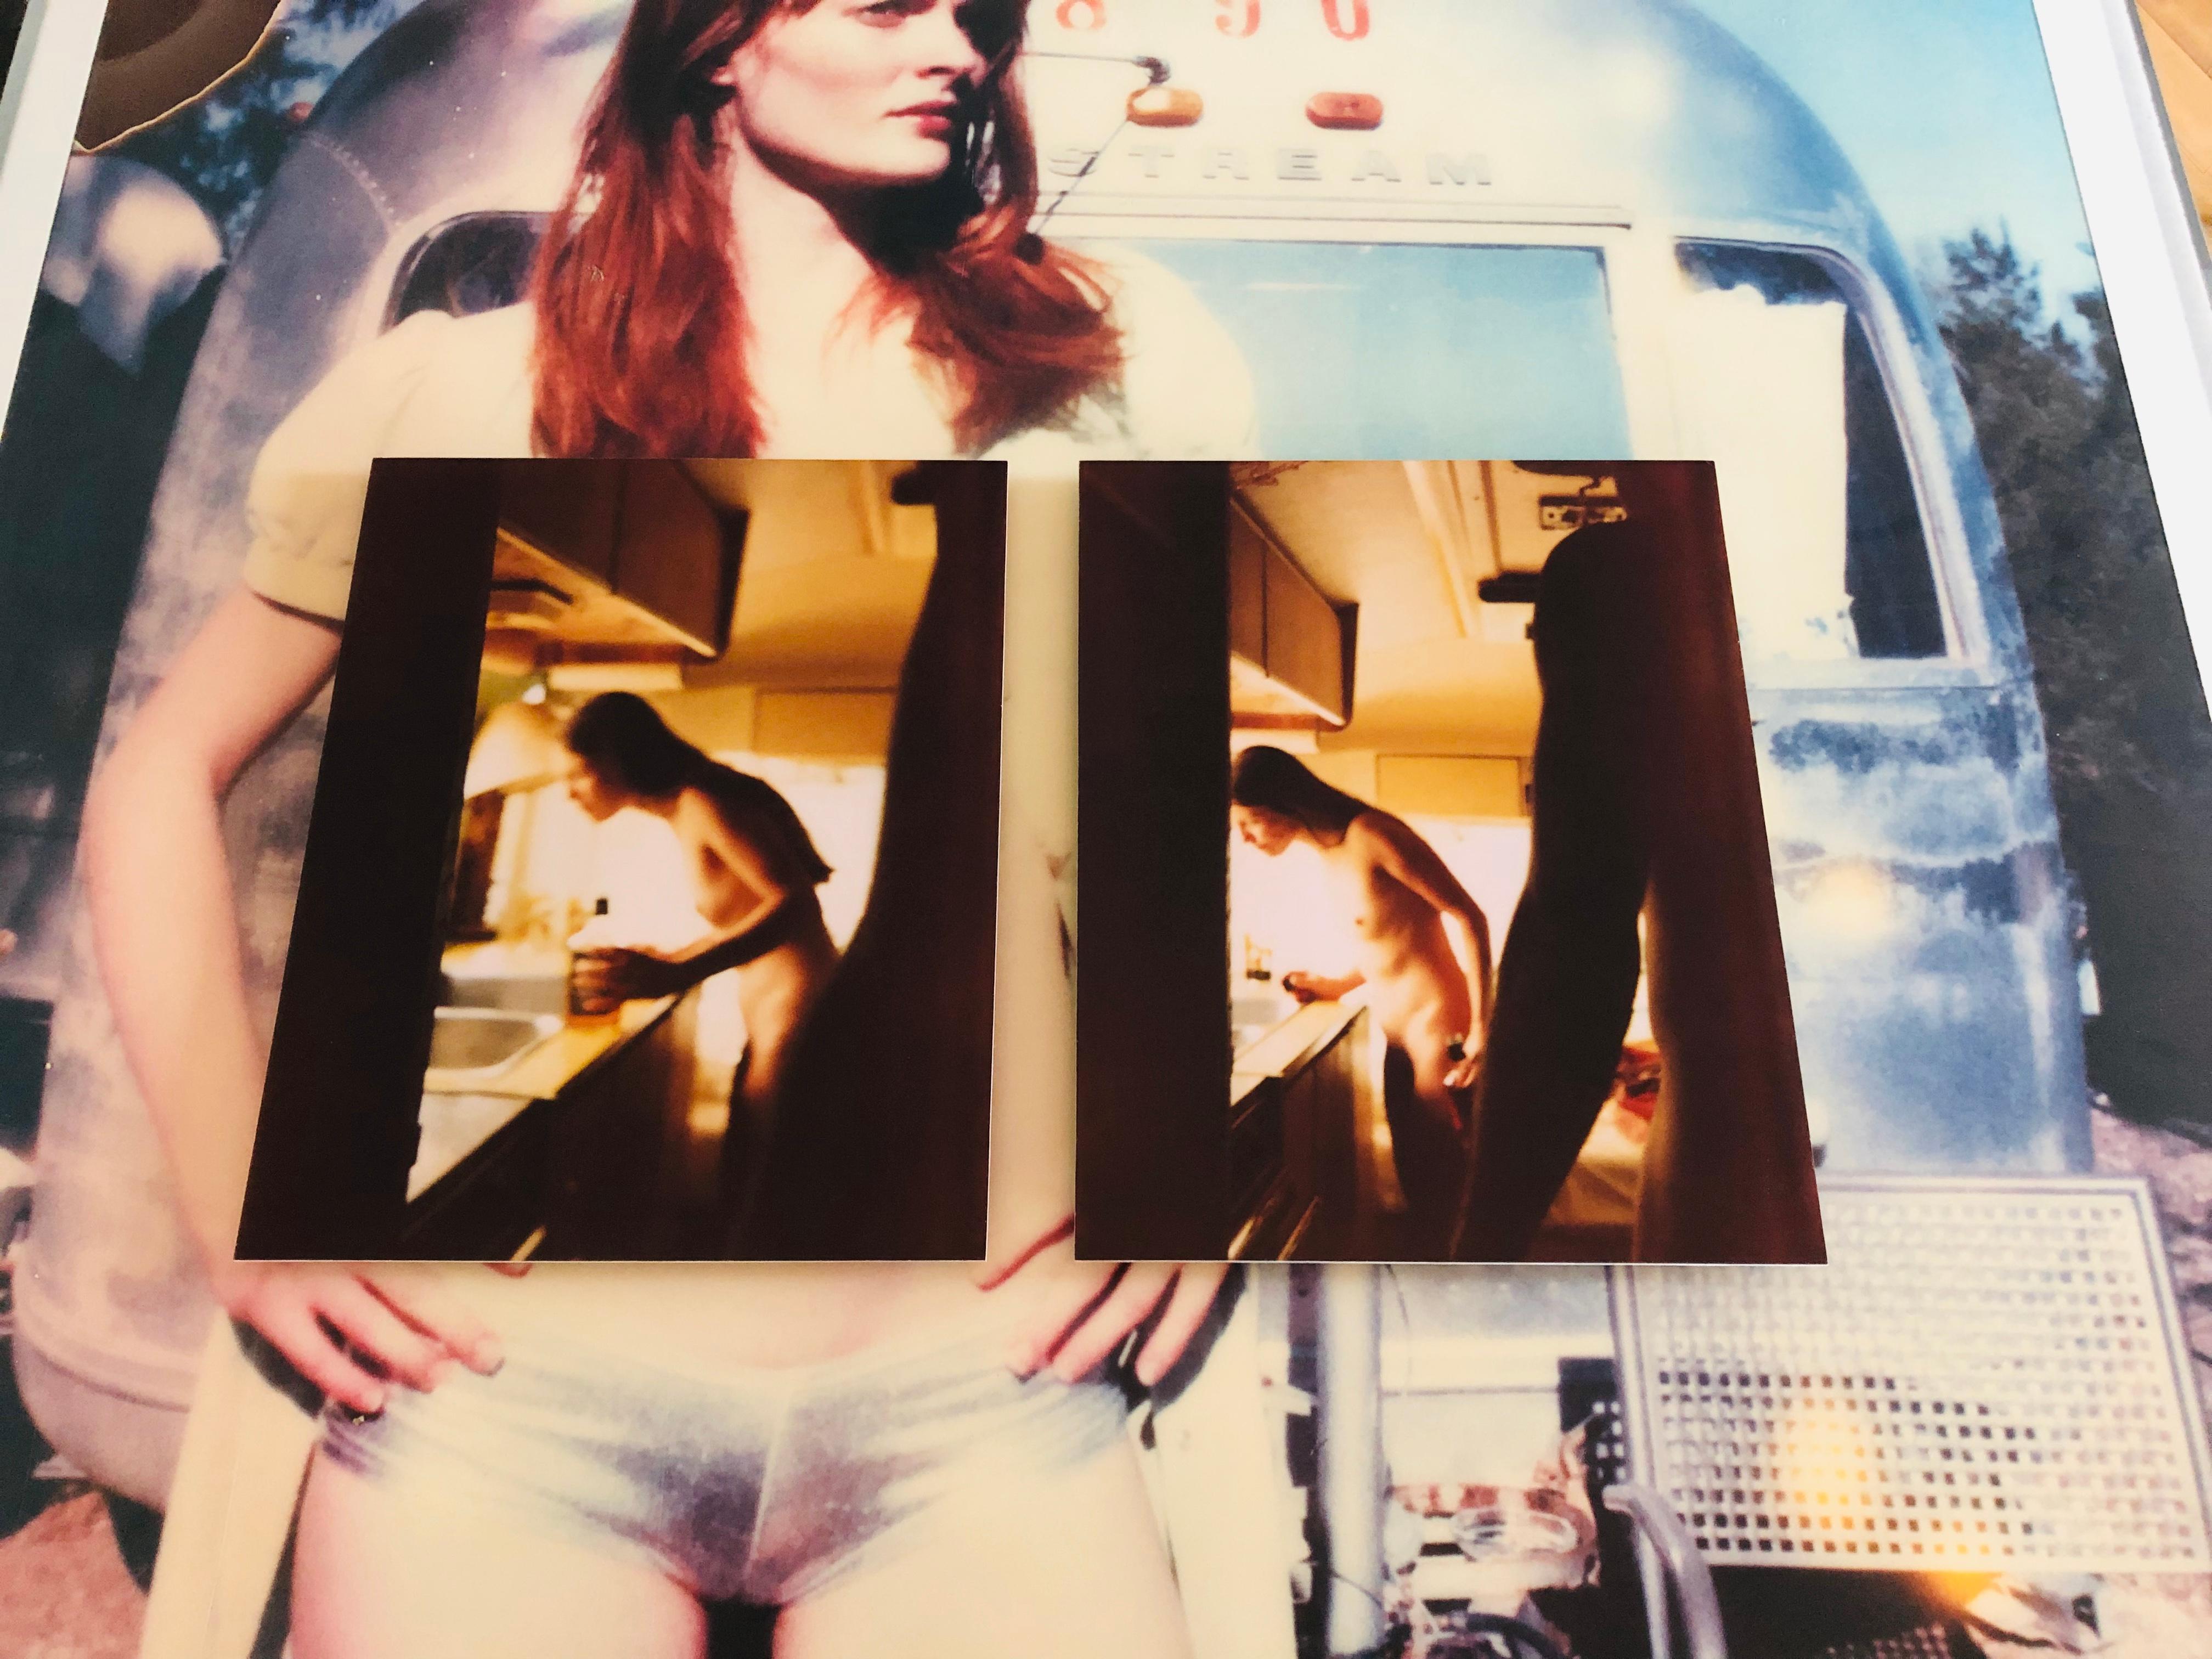 Whisky and Water VI (Sidewinder) - Diptych, Polaroid, Nude, 21st Century, Color - Brown Color Photograph by Stefanie Schneider